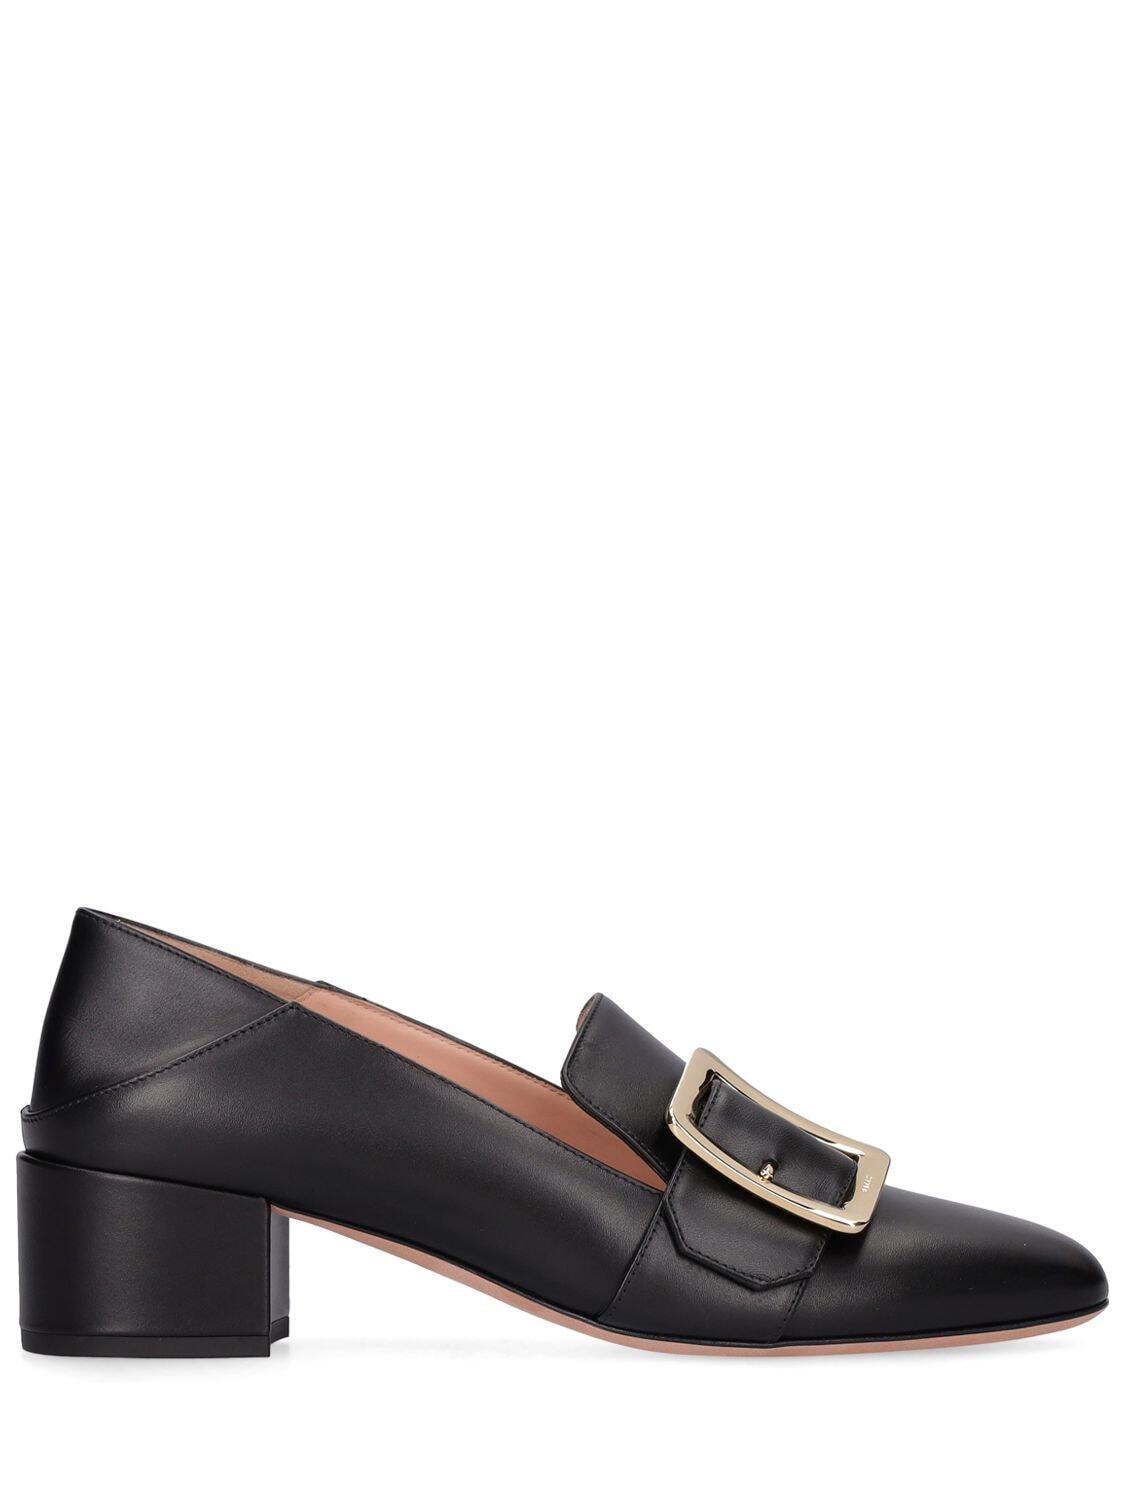 BALLY 40mm Janelle Faux Leather Pumps in black